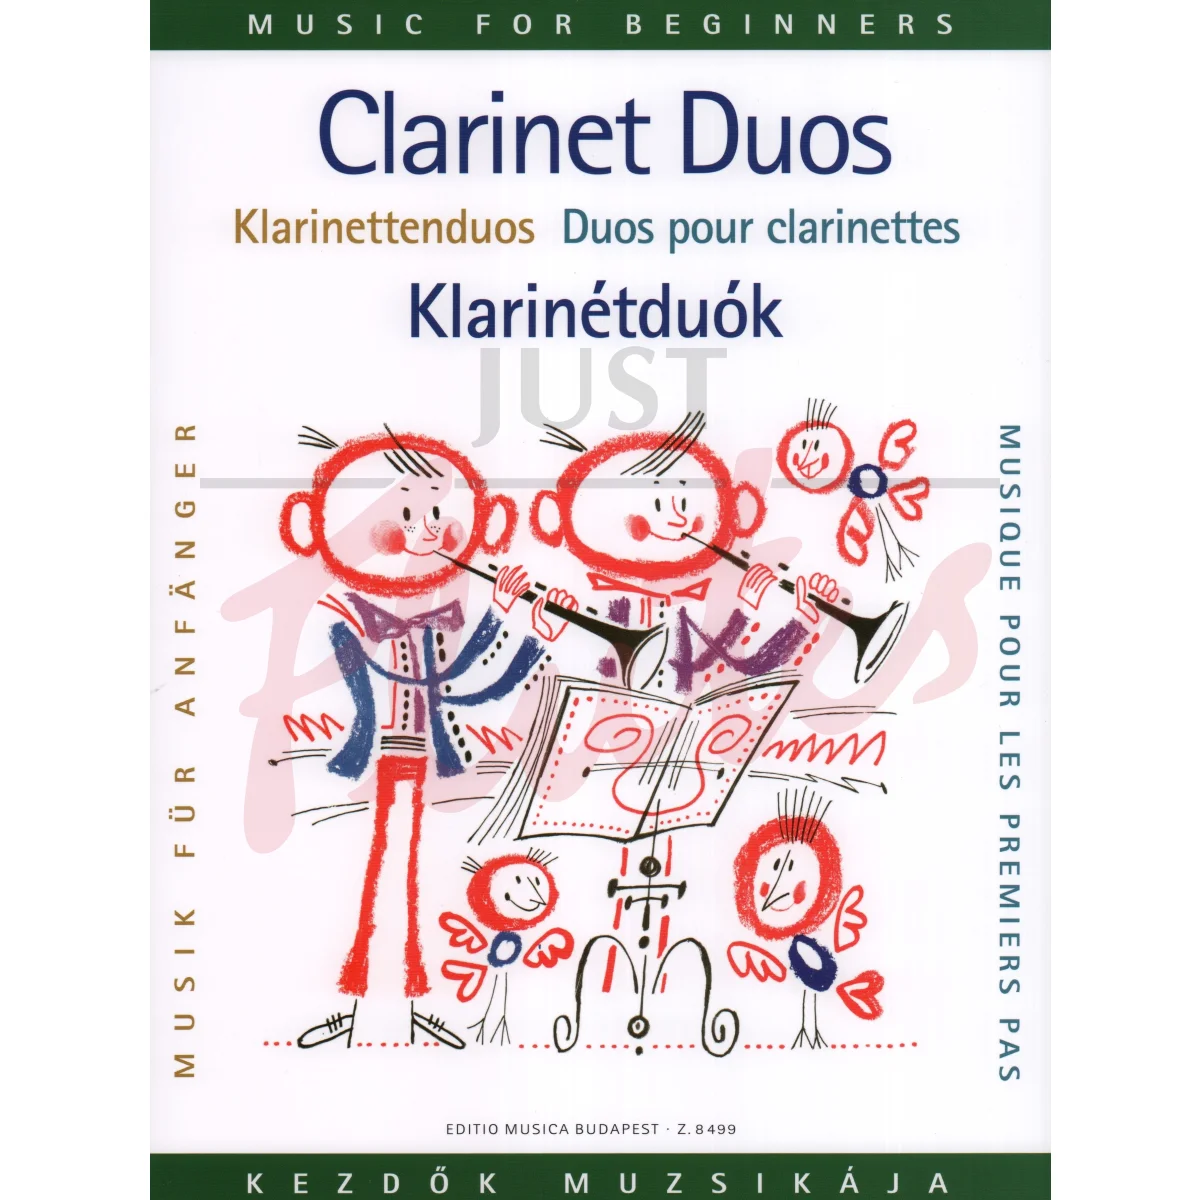 Clarinet Duos for Beginners